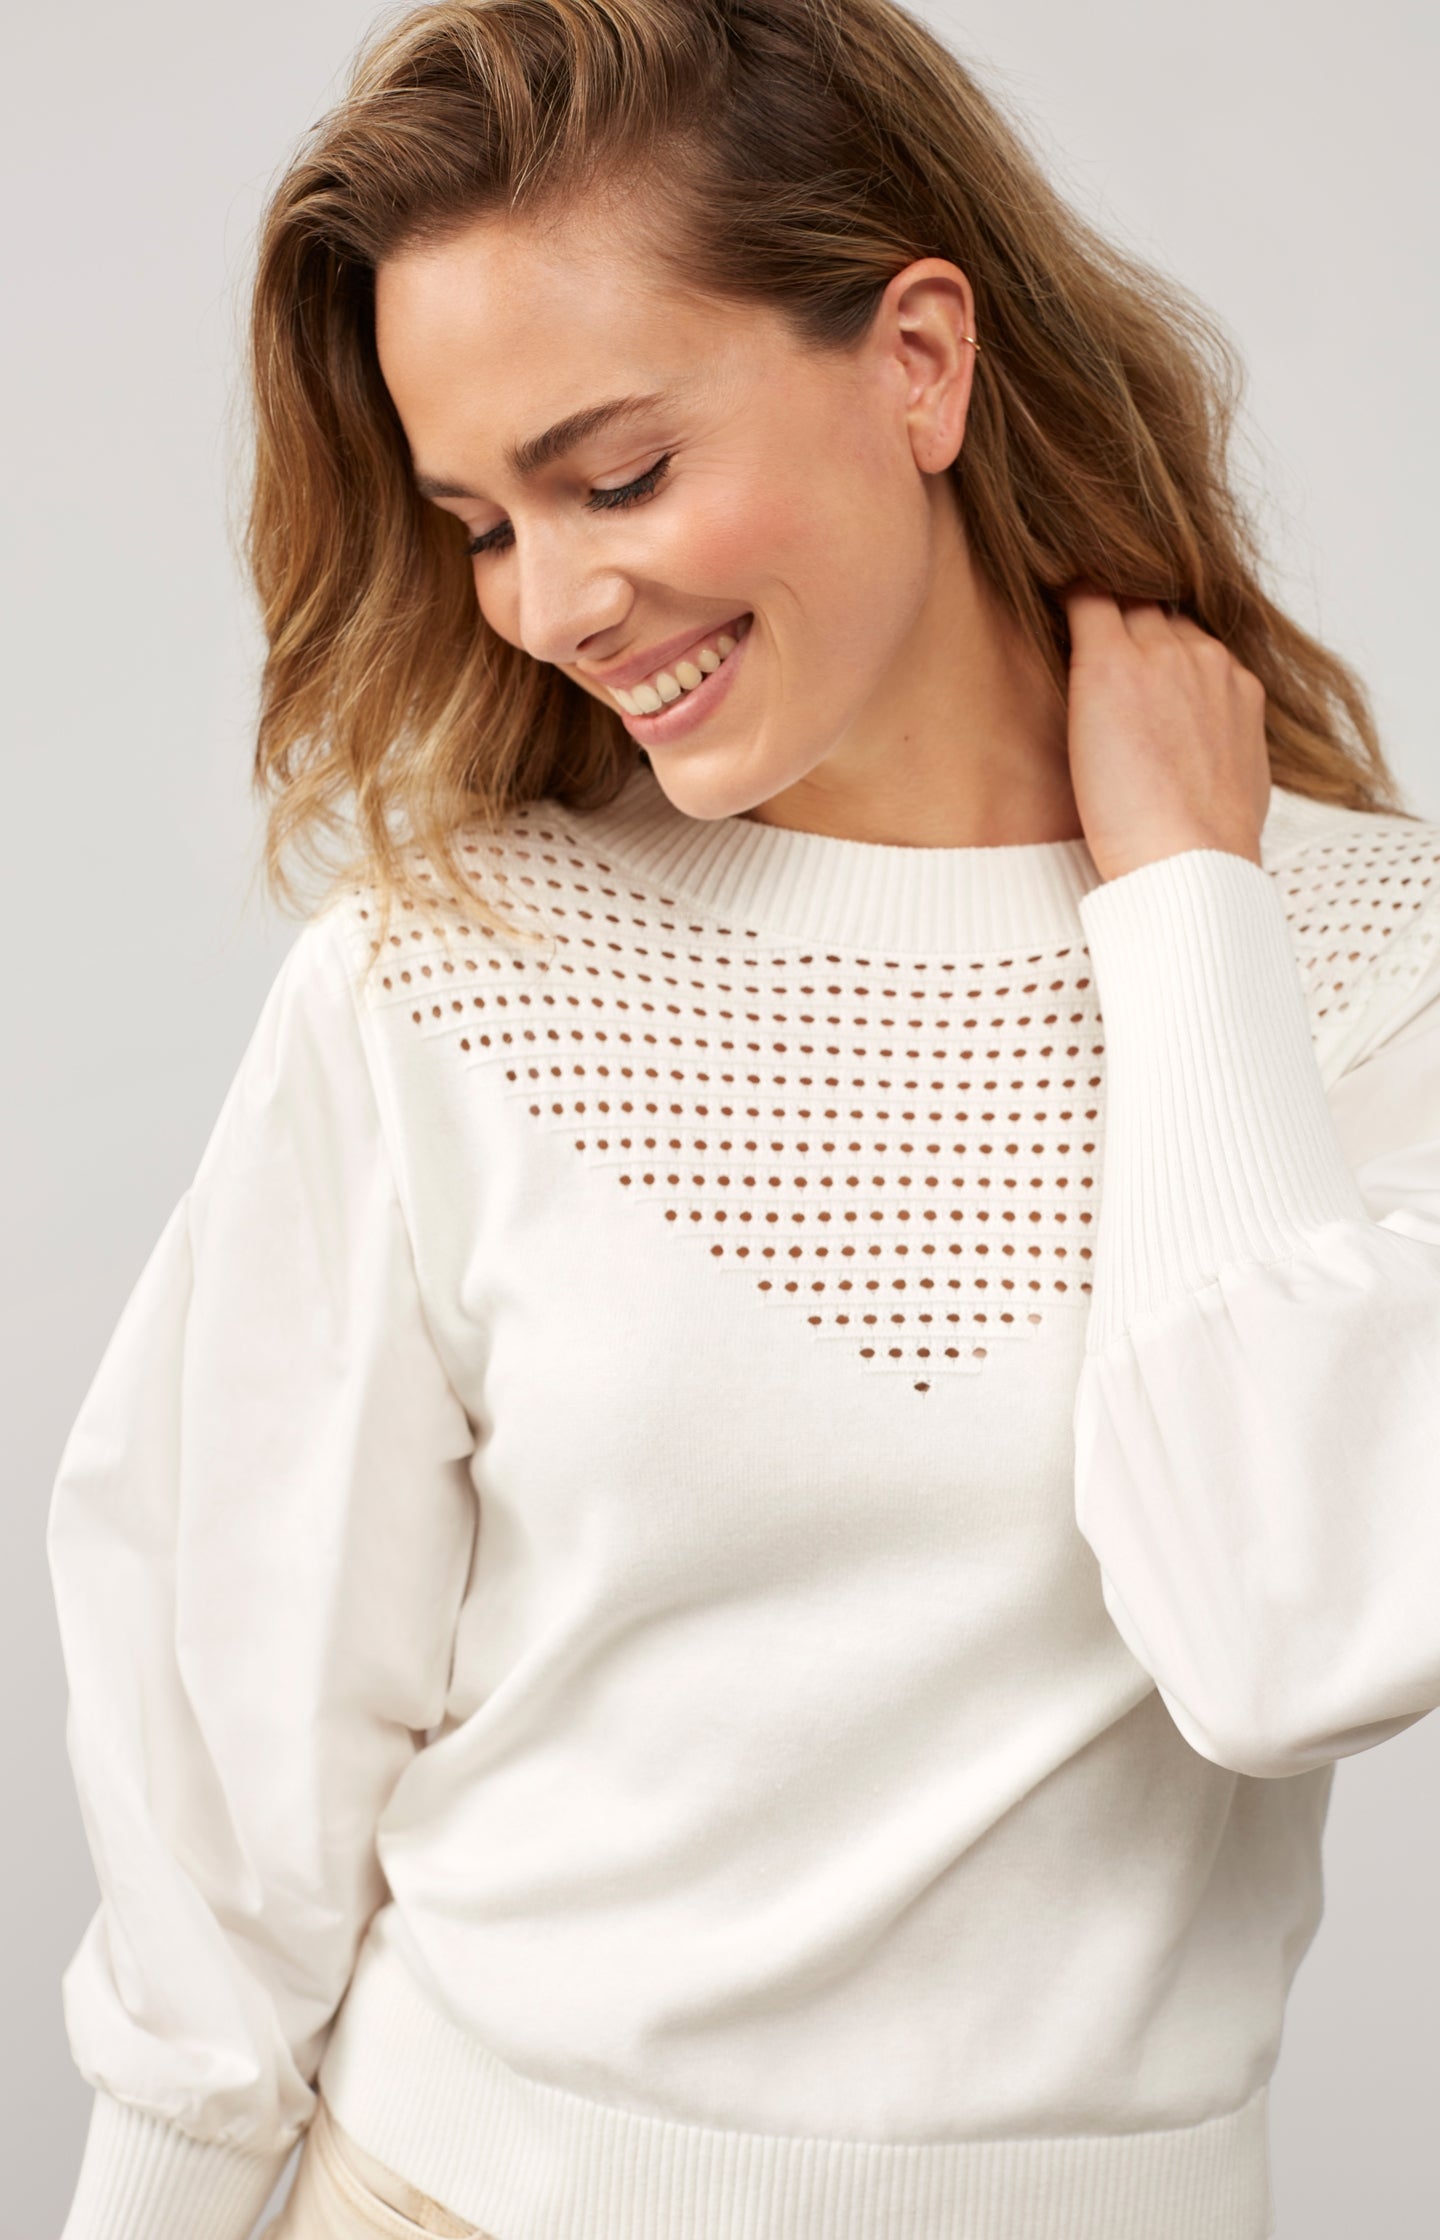 Pointelle sweater with round neck and long puffed sleeves - Type: lookbook